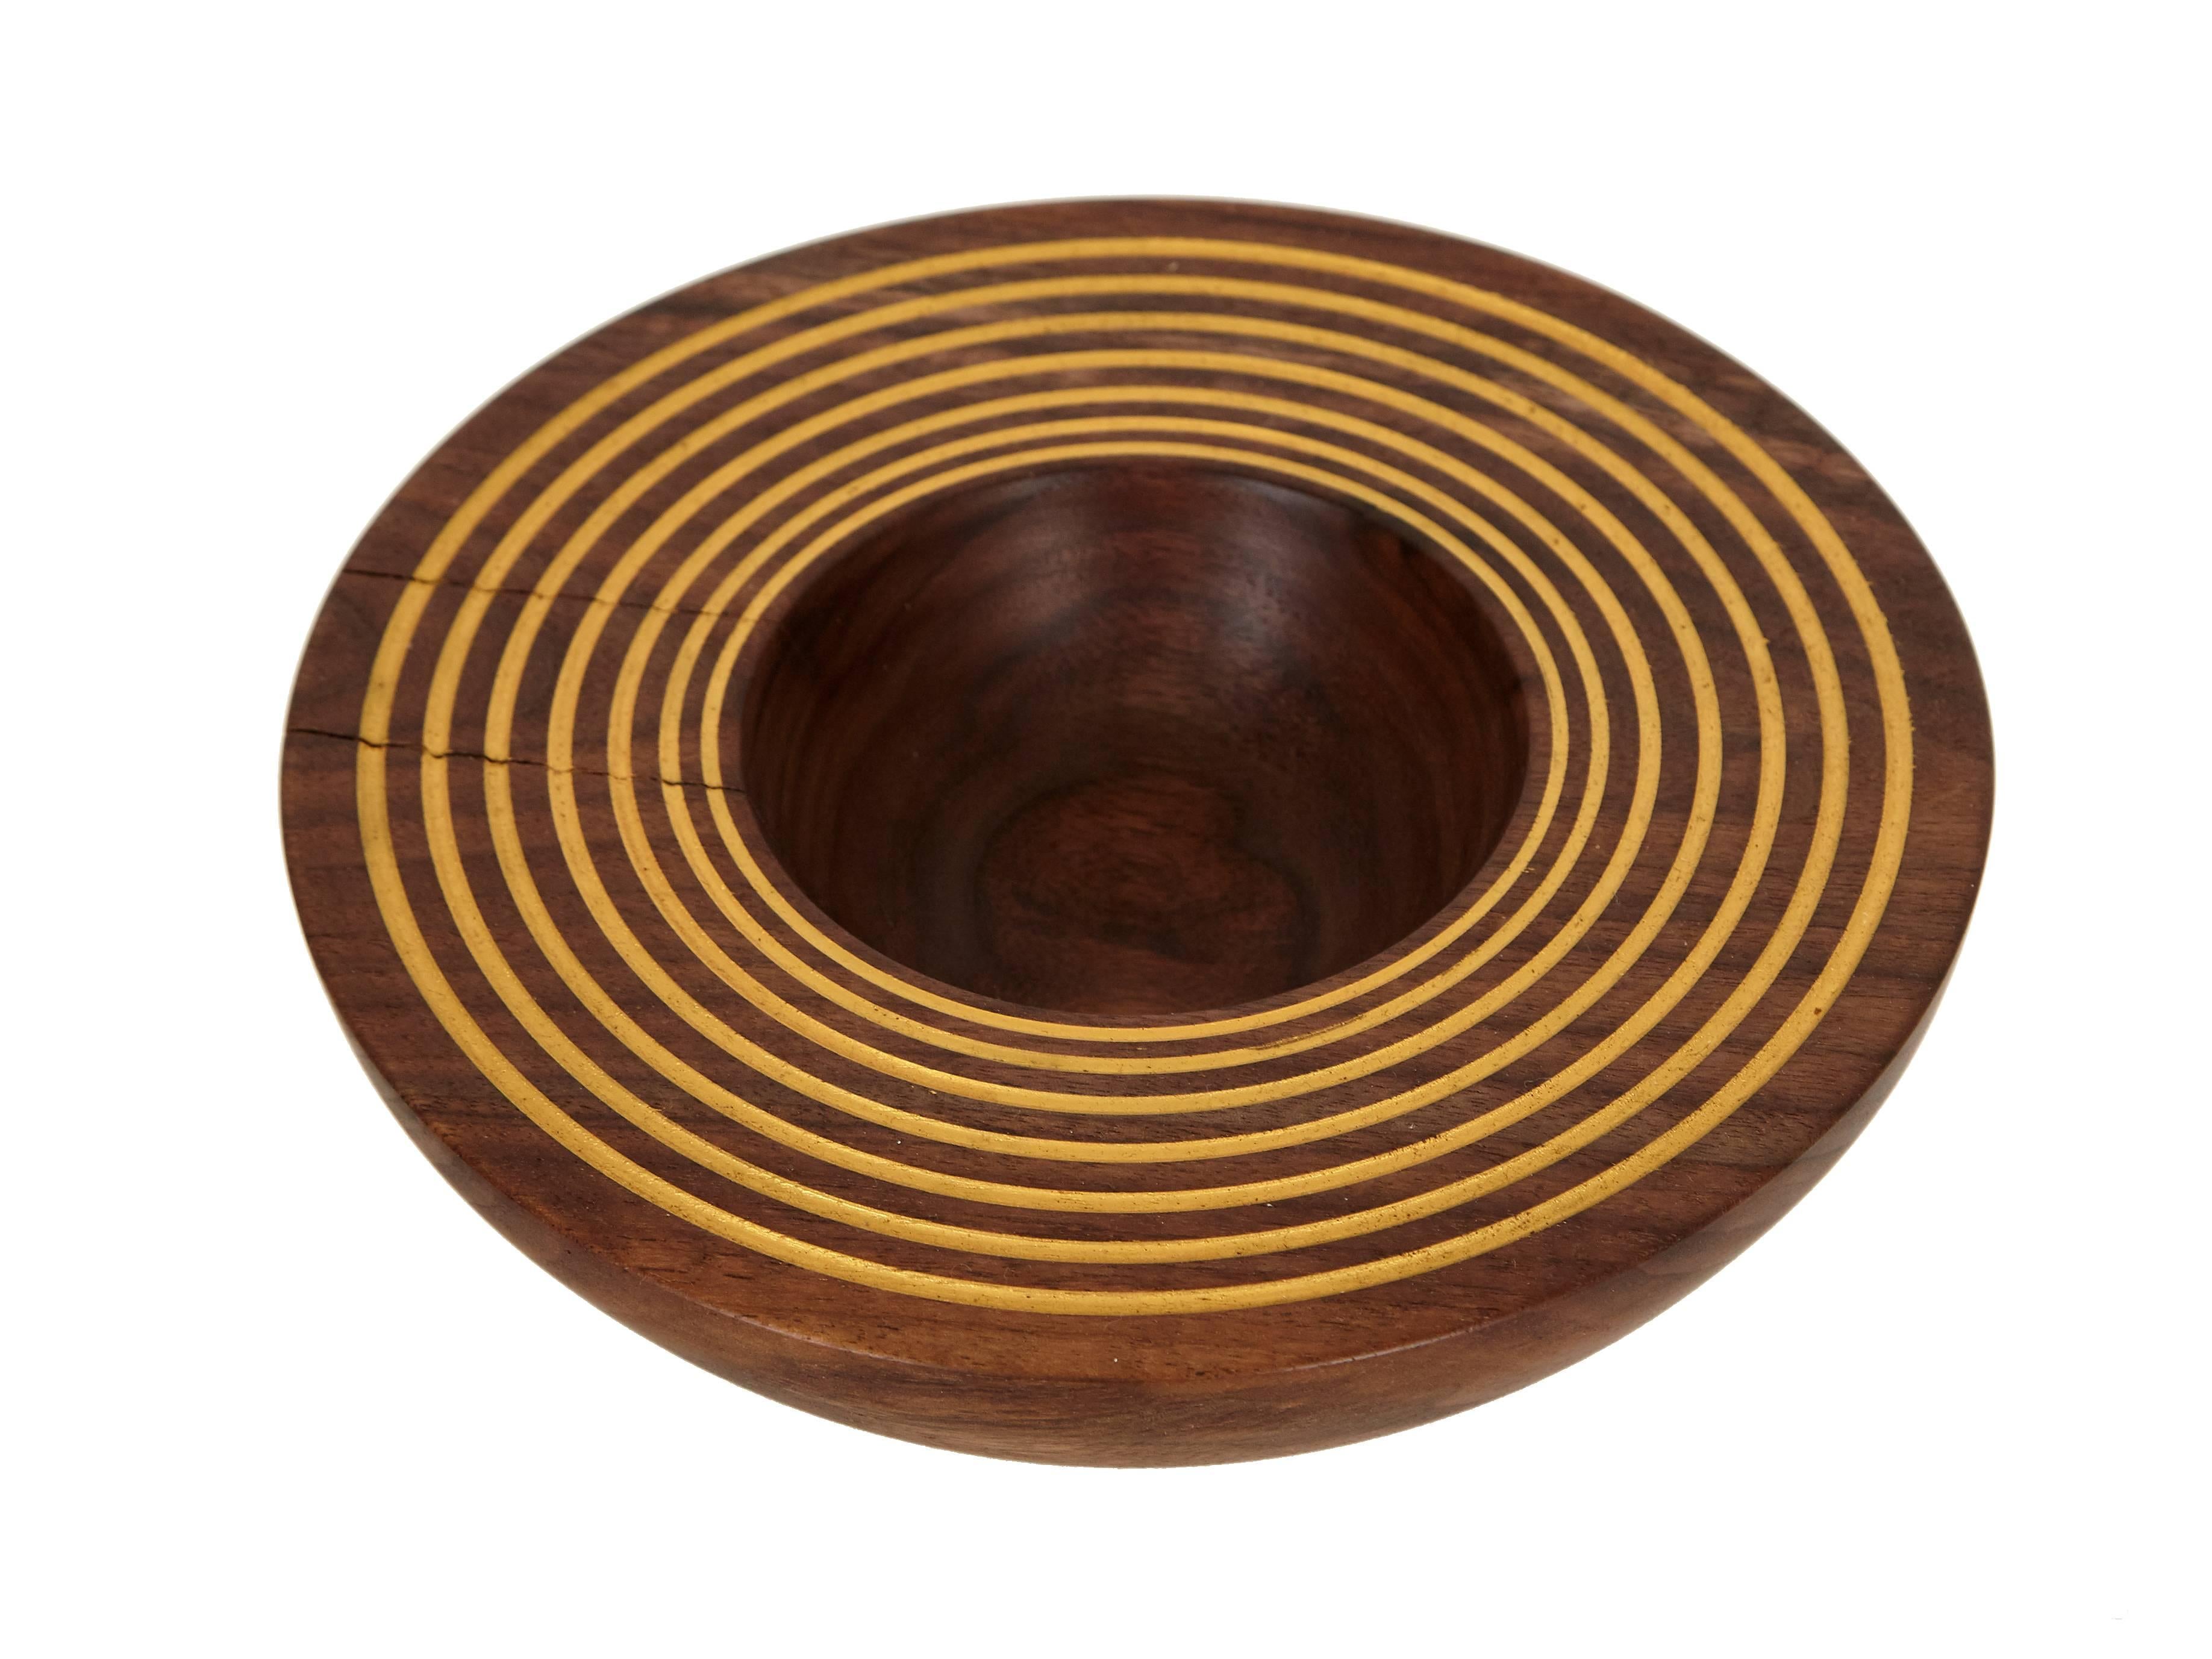 Core Series black walnut bowl by Claudio Sebastian Stalling lathe turned and finished by hand with gold paint detailing.

Originally from the German Alps, and trained in the traditional woodworking mastery of the German lineages, Claudio Sebastian